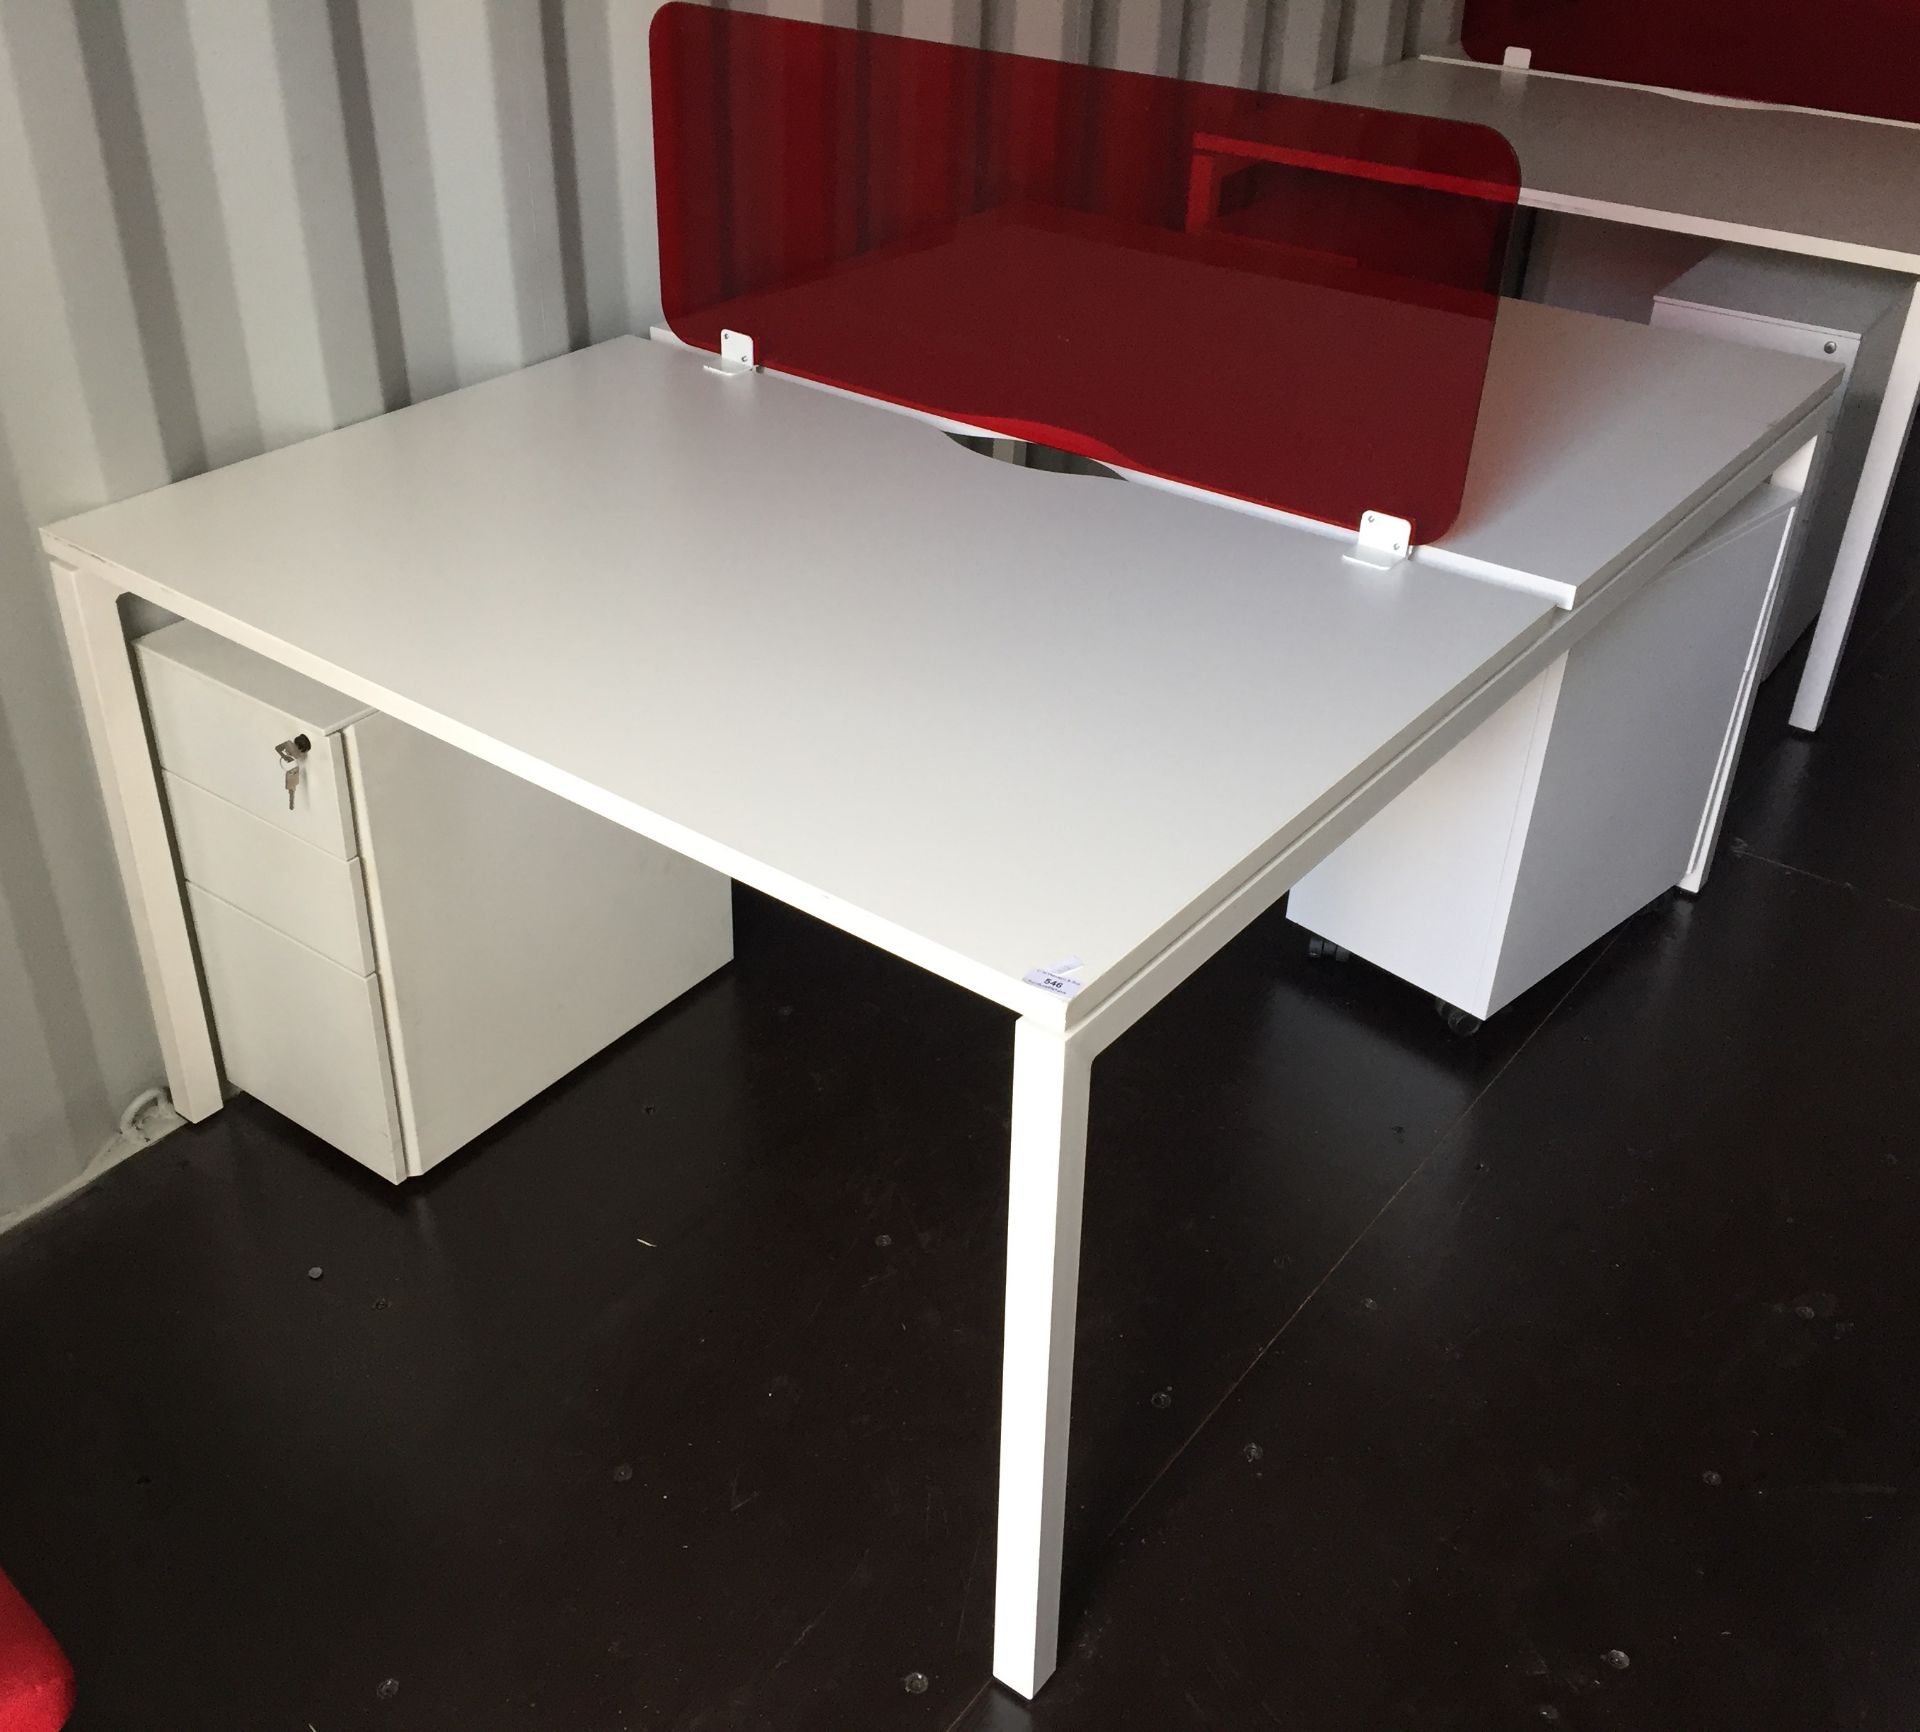 White steel framed double sided desk pod with two 3 drawer white metal mobile pedestals and a red